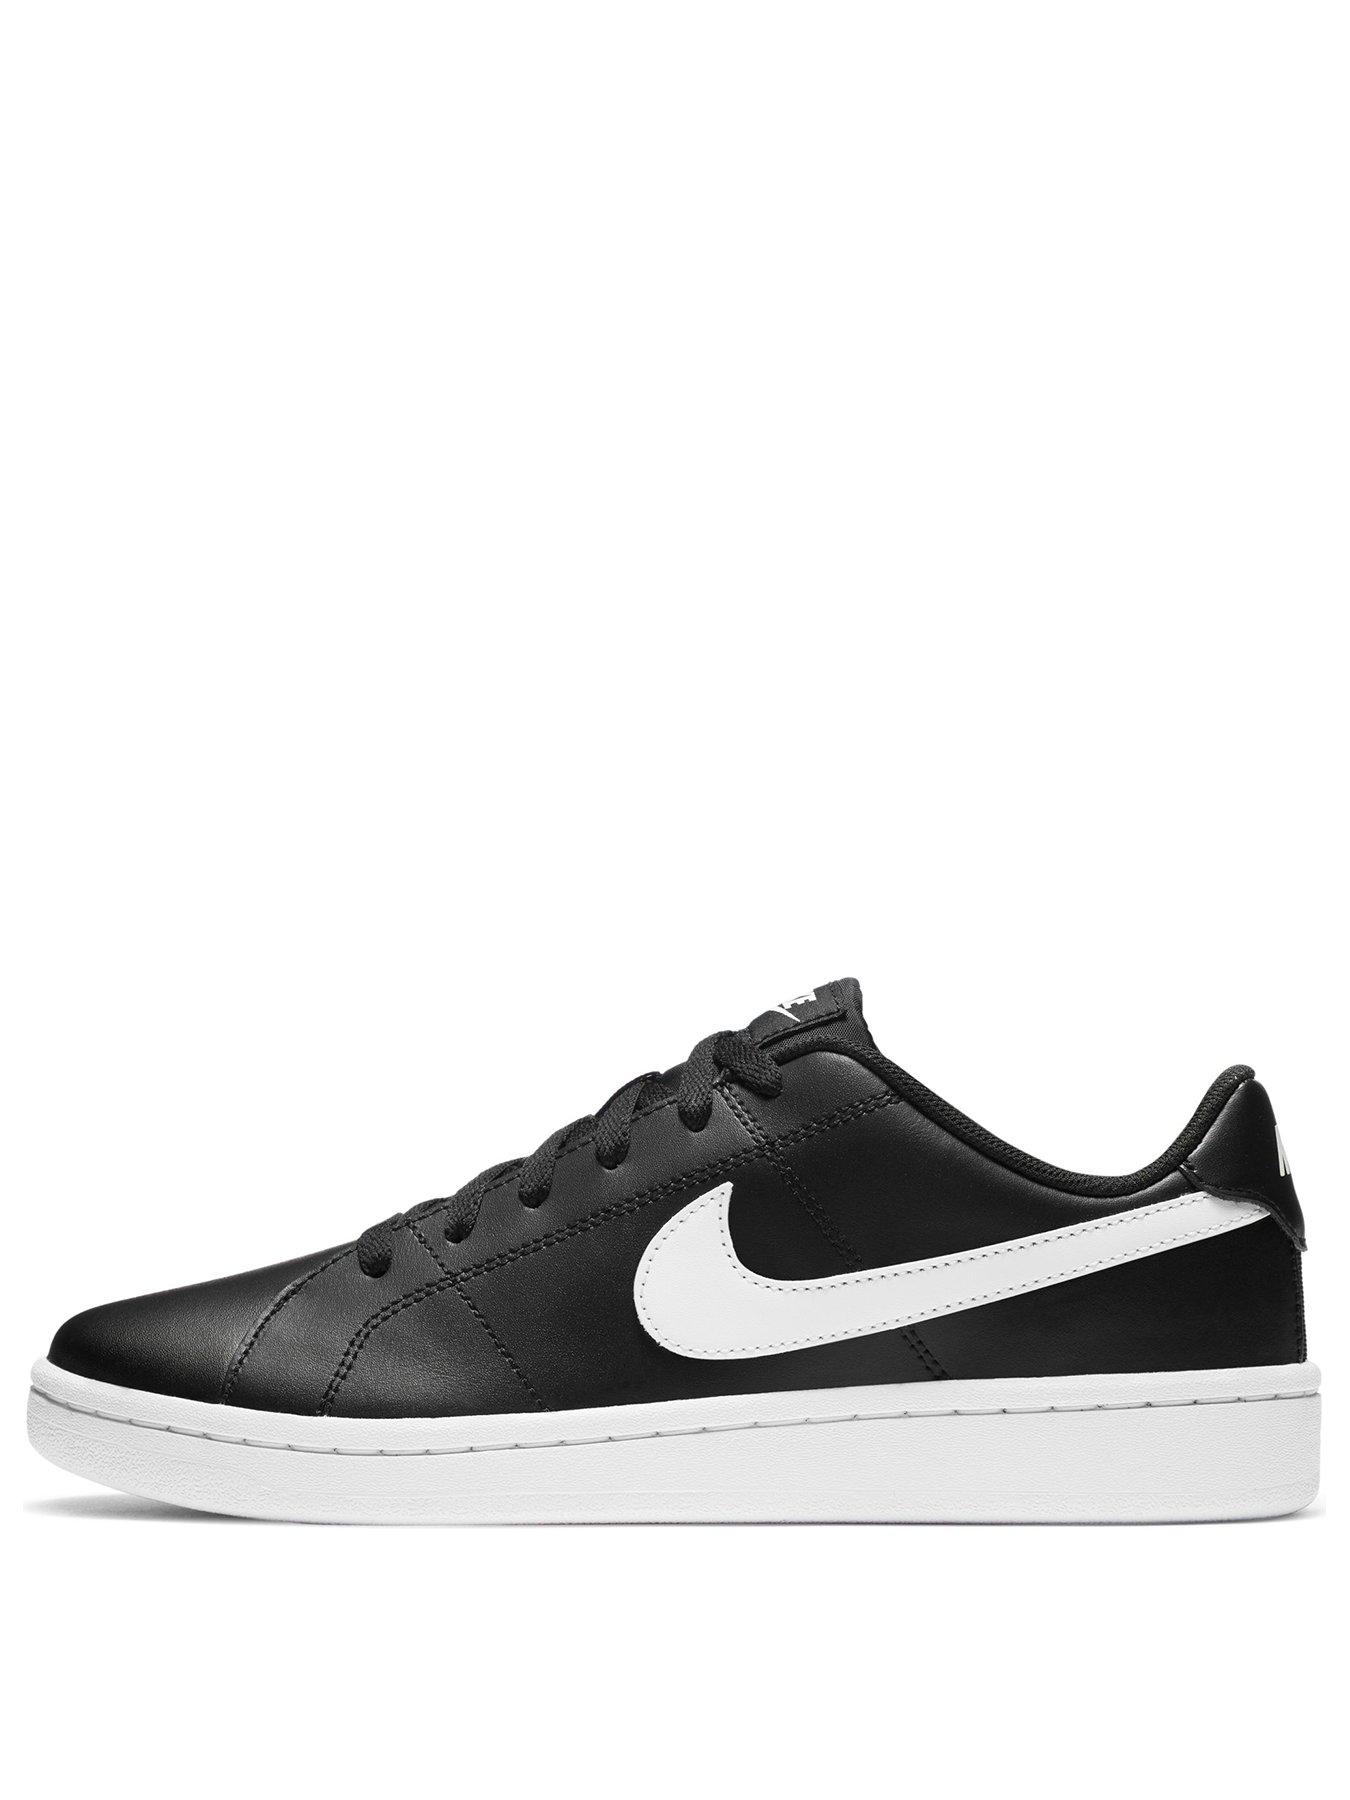 court royale trainers mens